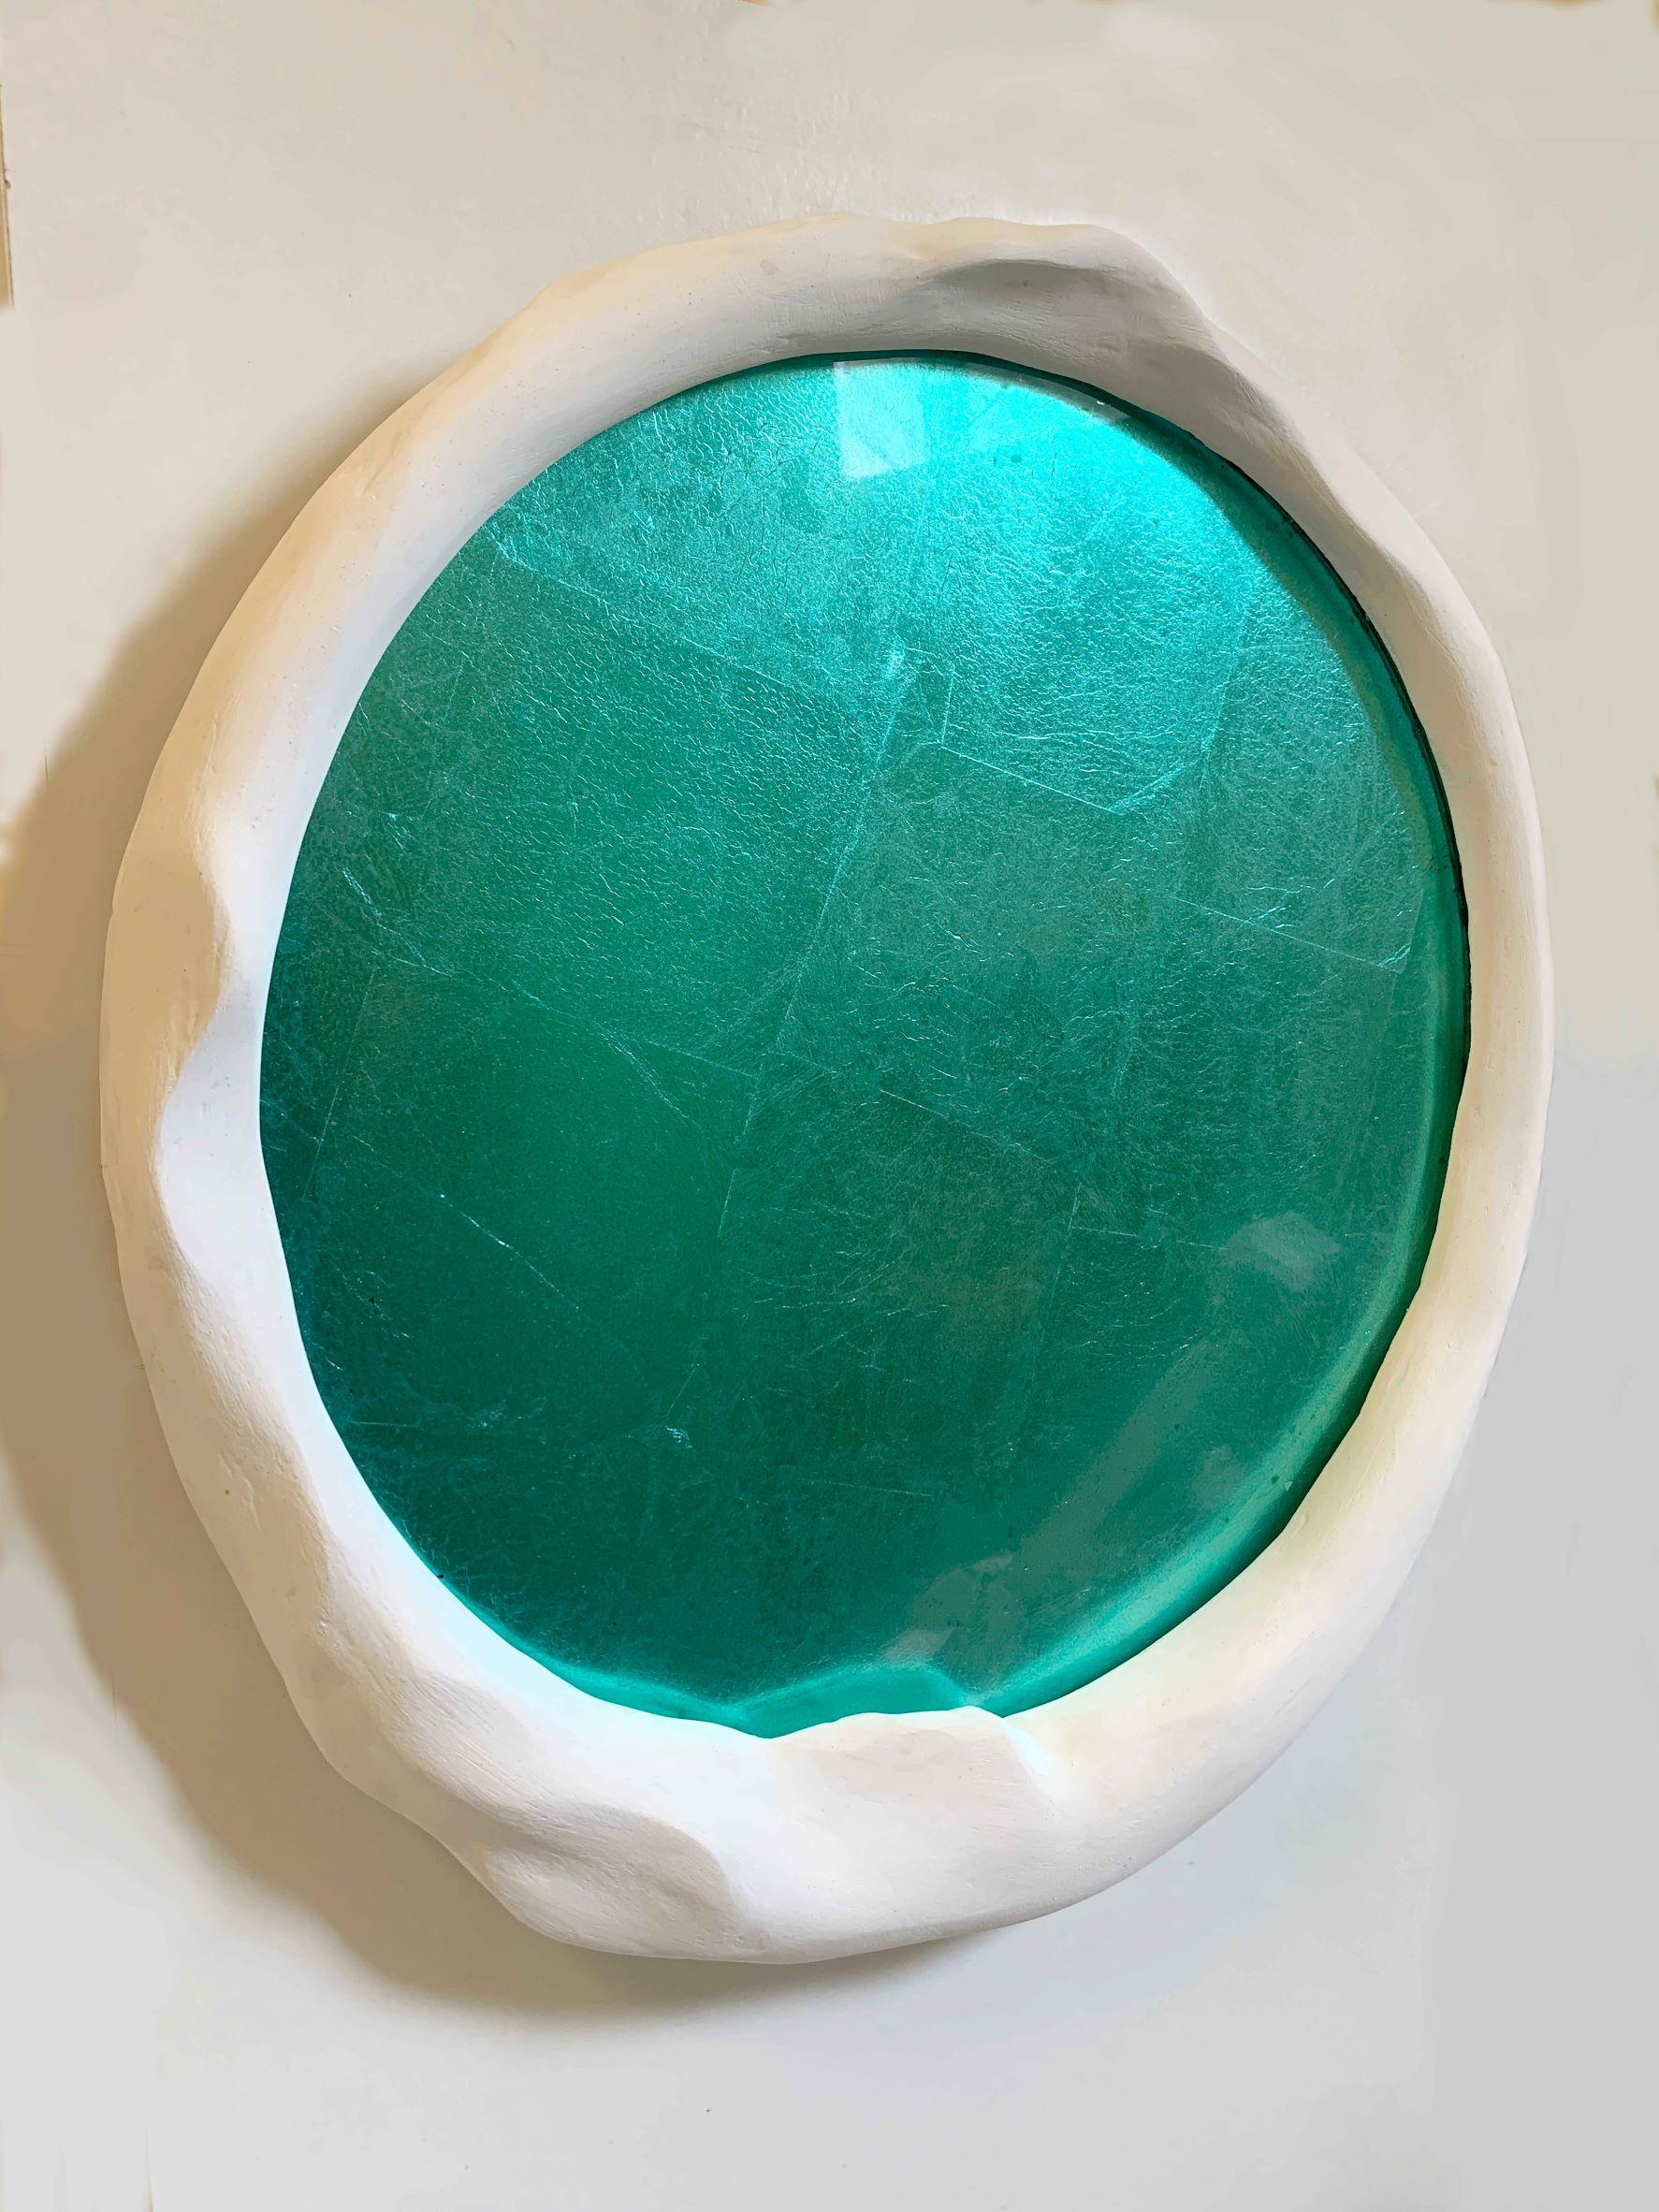 This is a custom sculptural mirror frame in white plaster and hyrdostone with interior armature, featuring japanese dyed blue leaf verre eglomise glass panel. This piece is 17.5 W x 18.5 H x 1.5 Deep inches. Upon request, this sculptural frame can